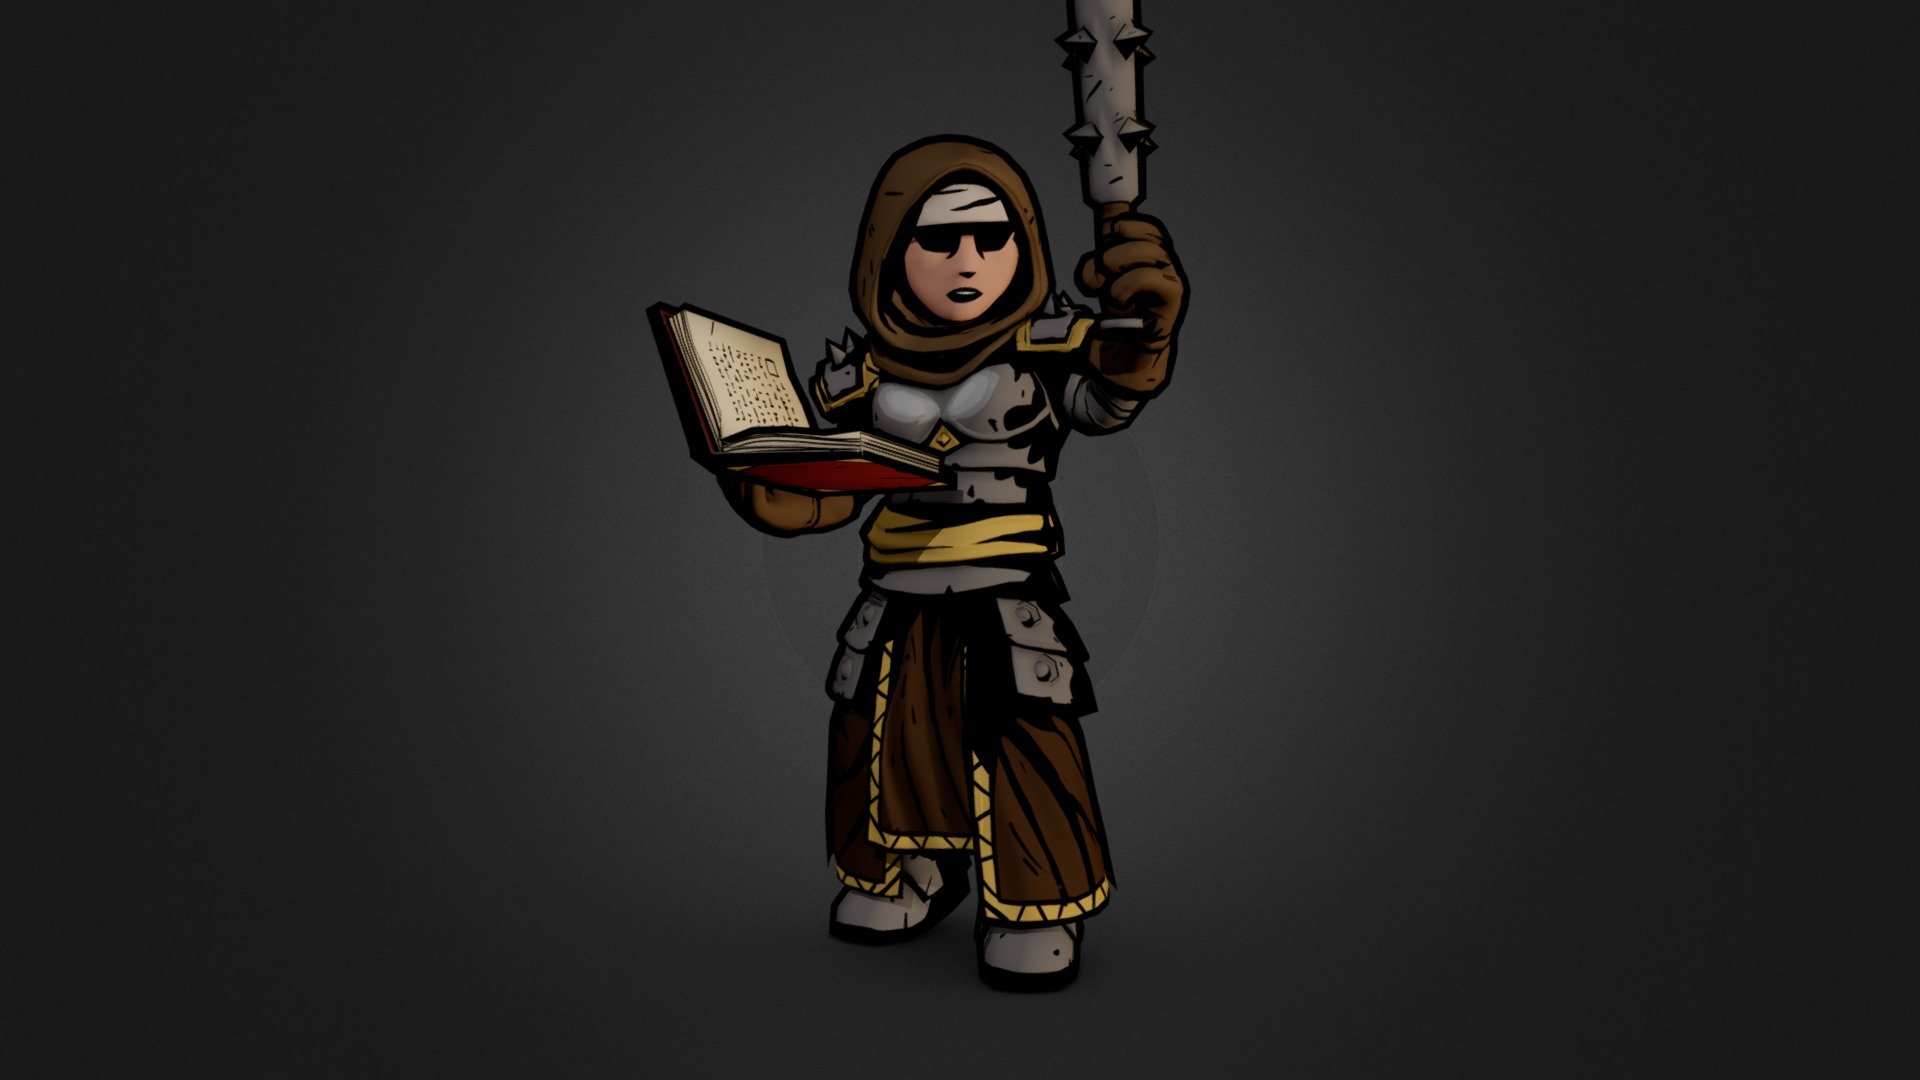 Here's some old fanart I did of the Vestal from Darkest Dungeon 3d model